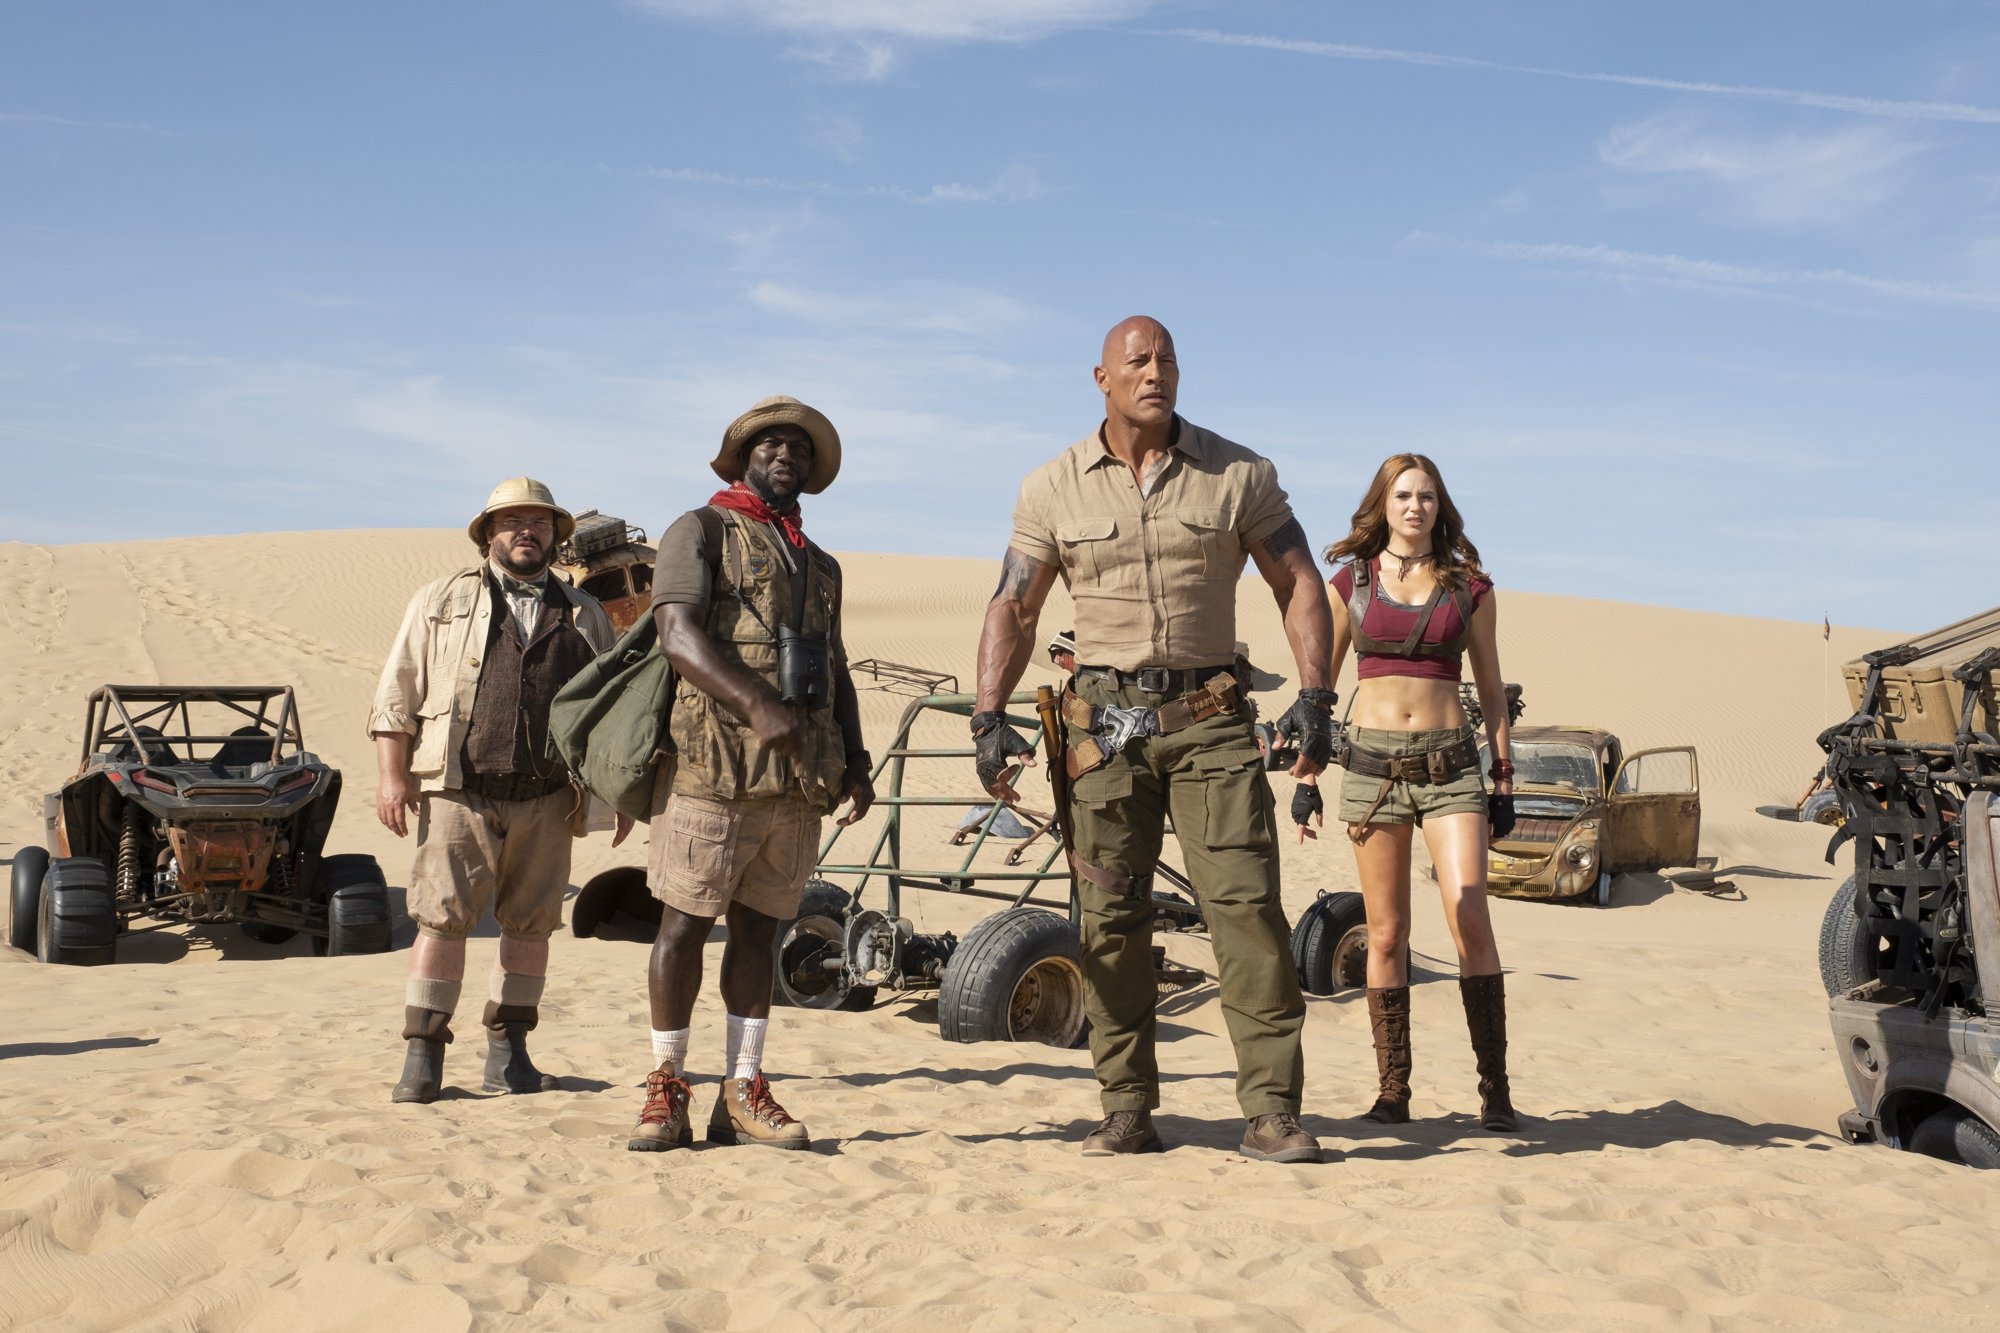 Jack Black, Kevin Hart, The Rock and Karen Gillan in Sony Pictures' Jumanji: The Next Level (2019)